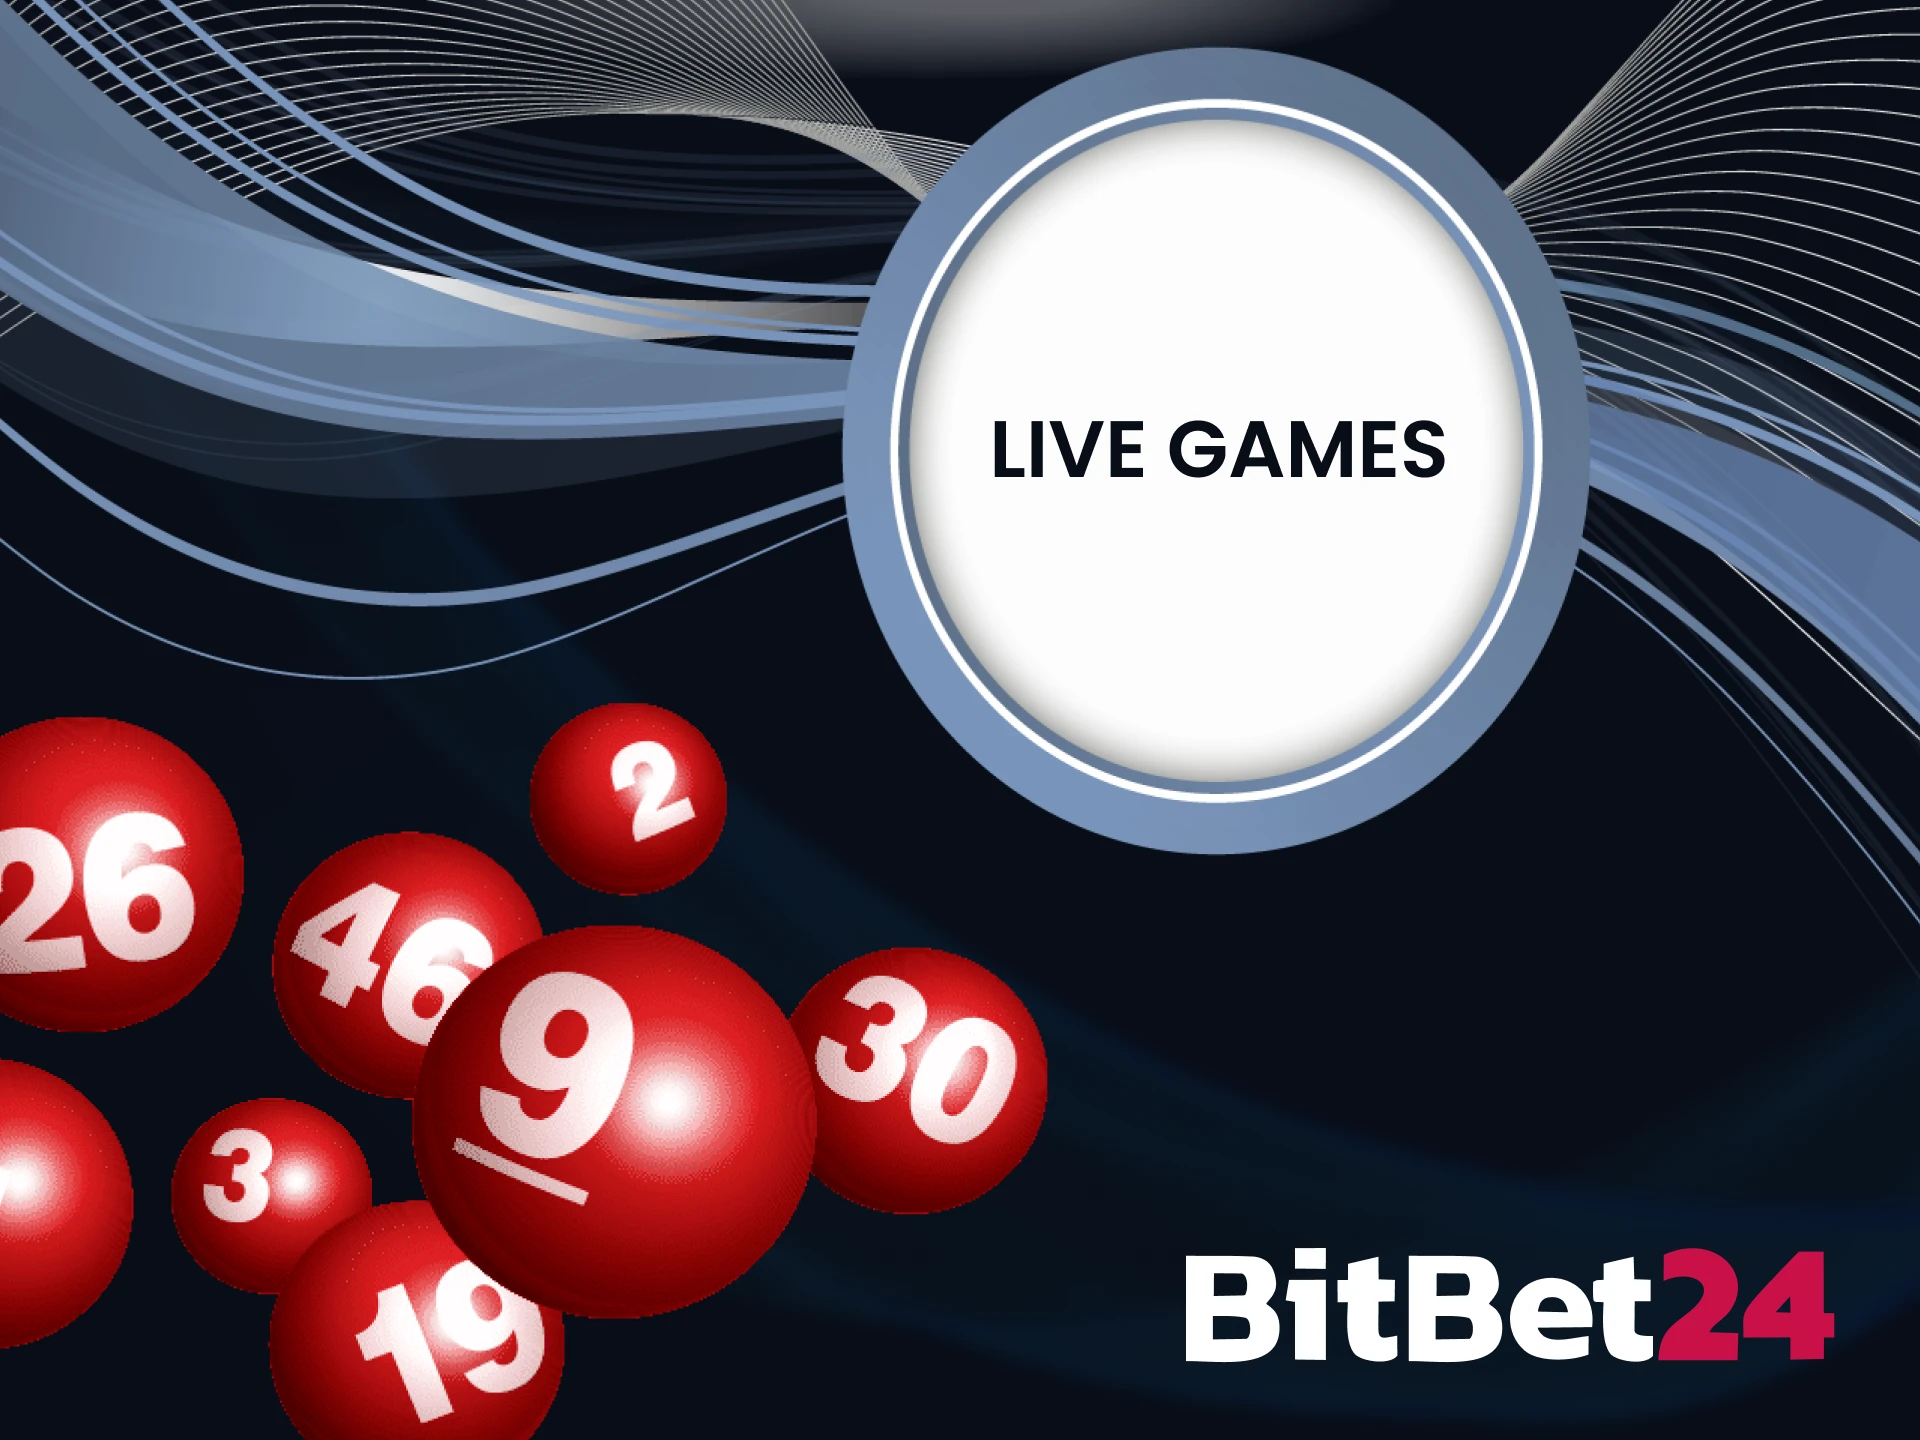 With BitBet24 you have access to live games.